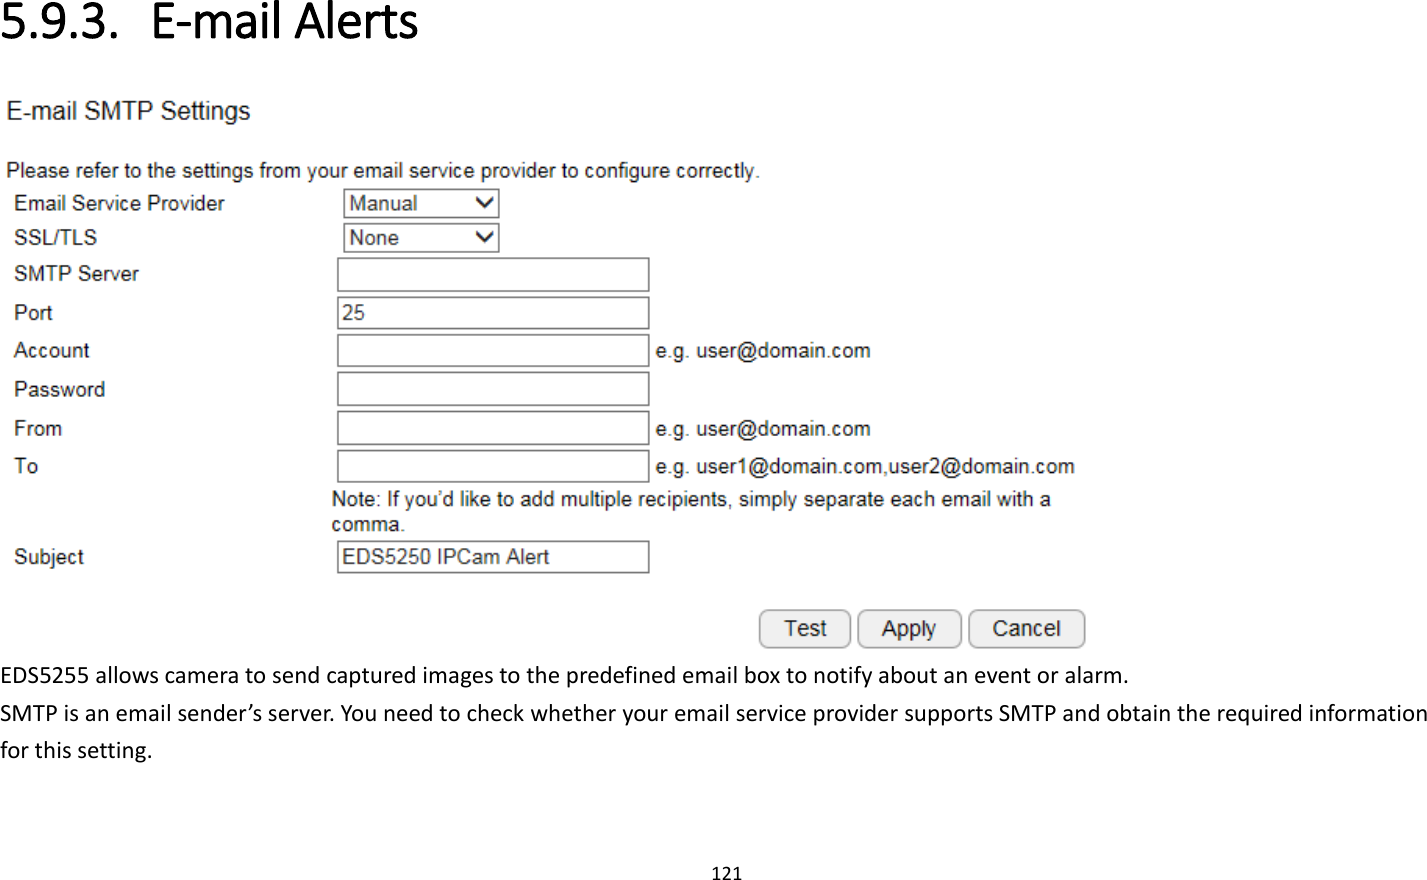 121  5.9.3. E-mail Alerts  EDS5255 allows camera to send captured images to the predefined email box to notify about an event or alarm.   SMTP is an email sender’s server. You need to check whether your email service provider supports SMTP and obtain the required information for this setting.    